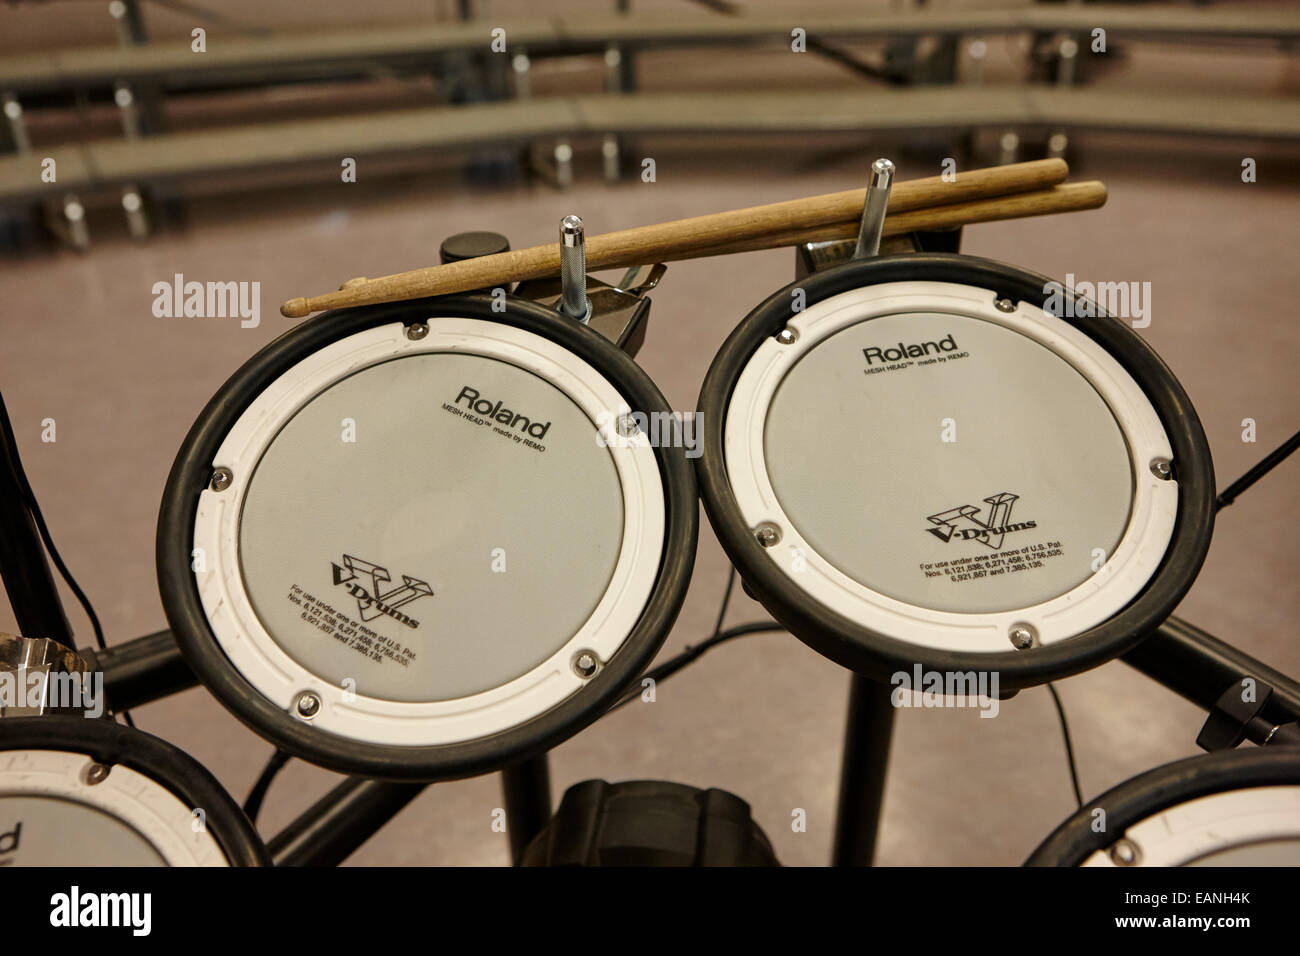 sticks and pads of an electronic drum kit in a music training room Stock Photo